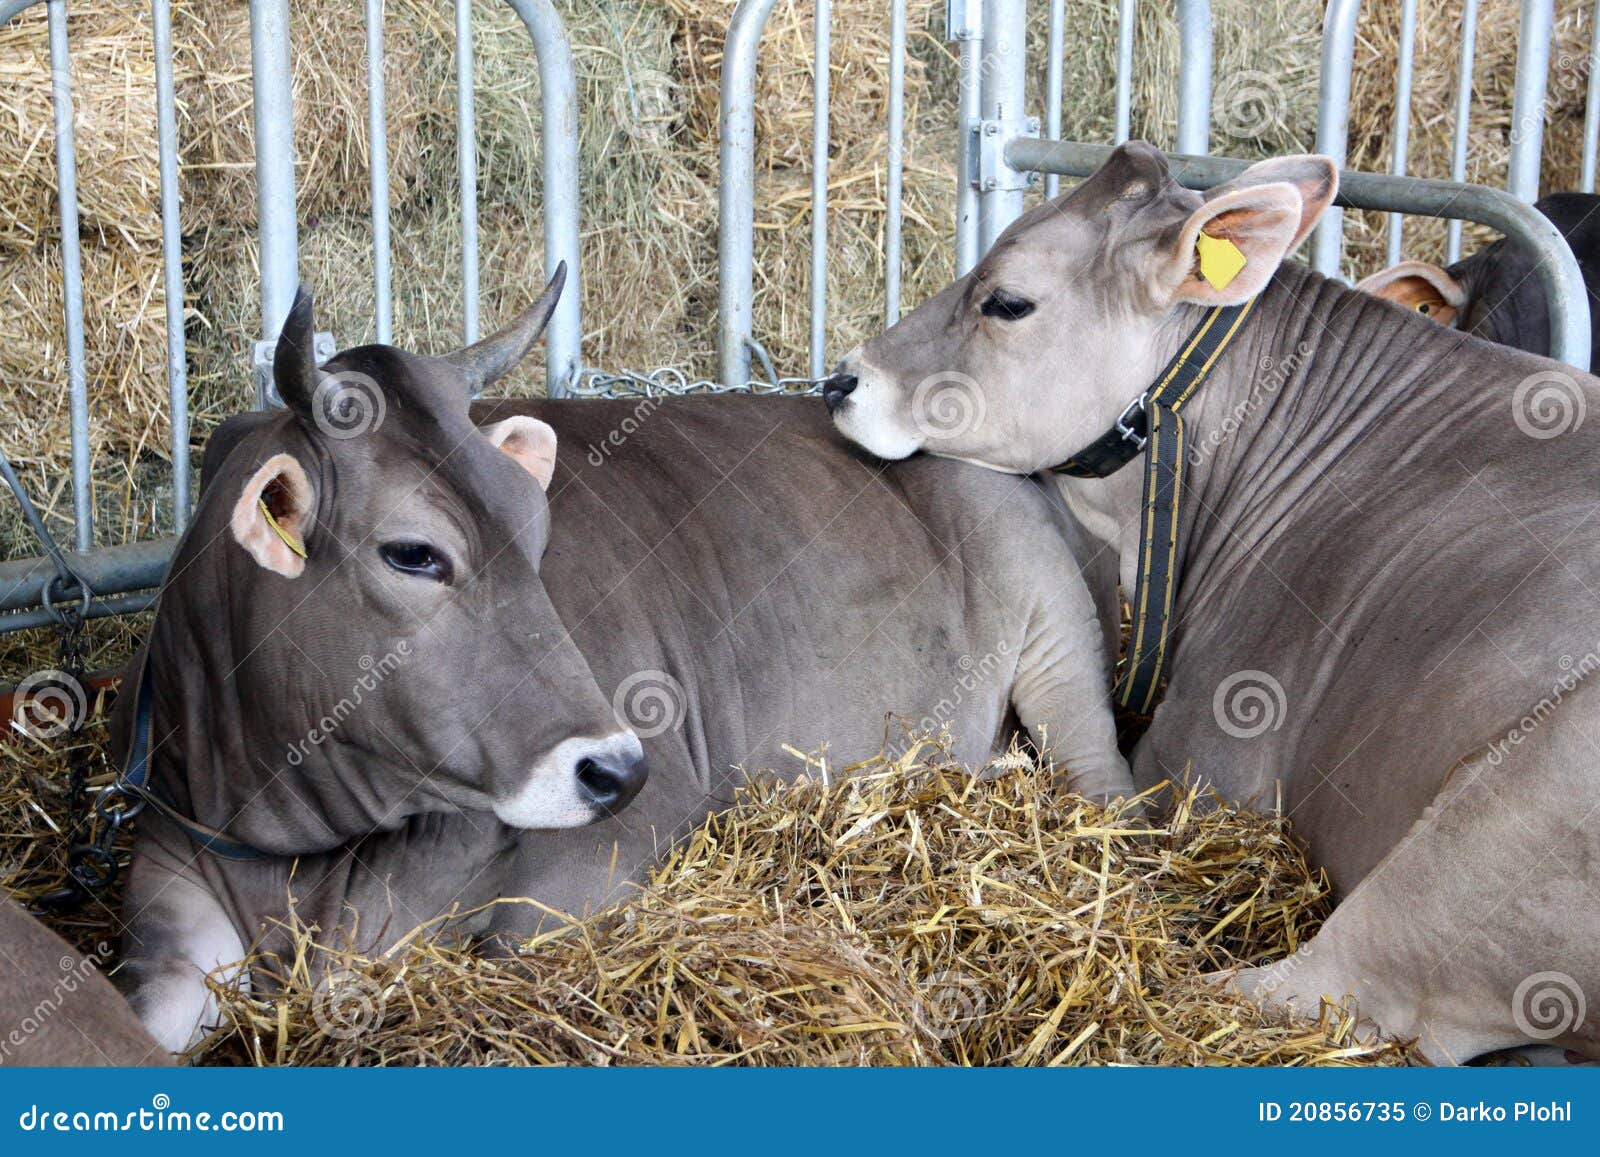 cattle in stable with fodder